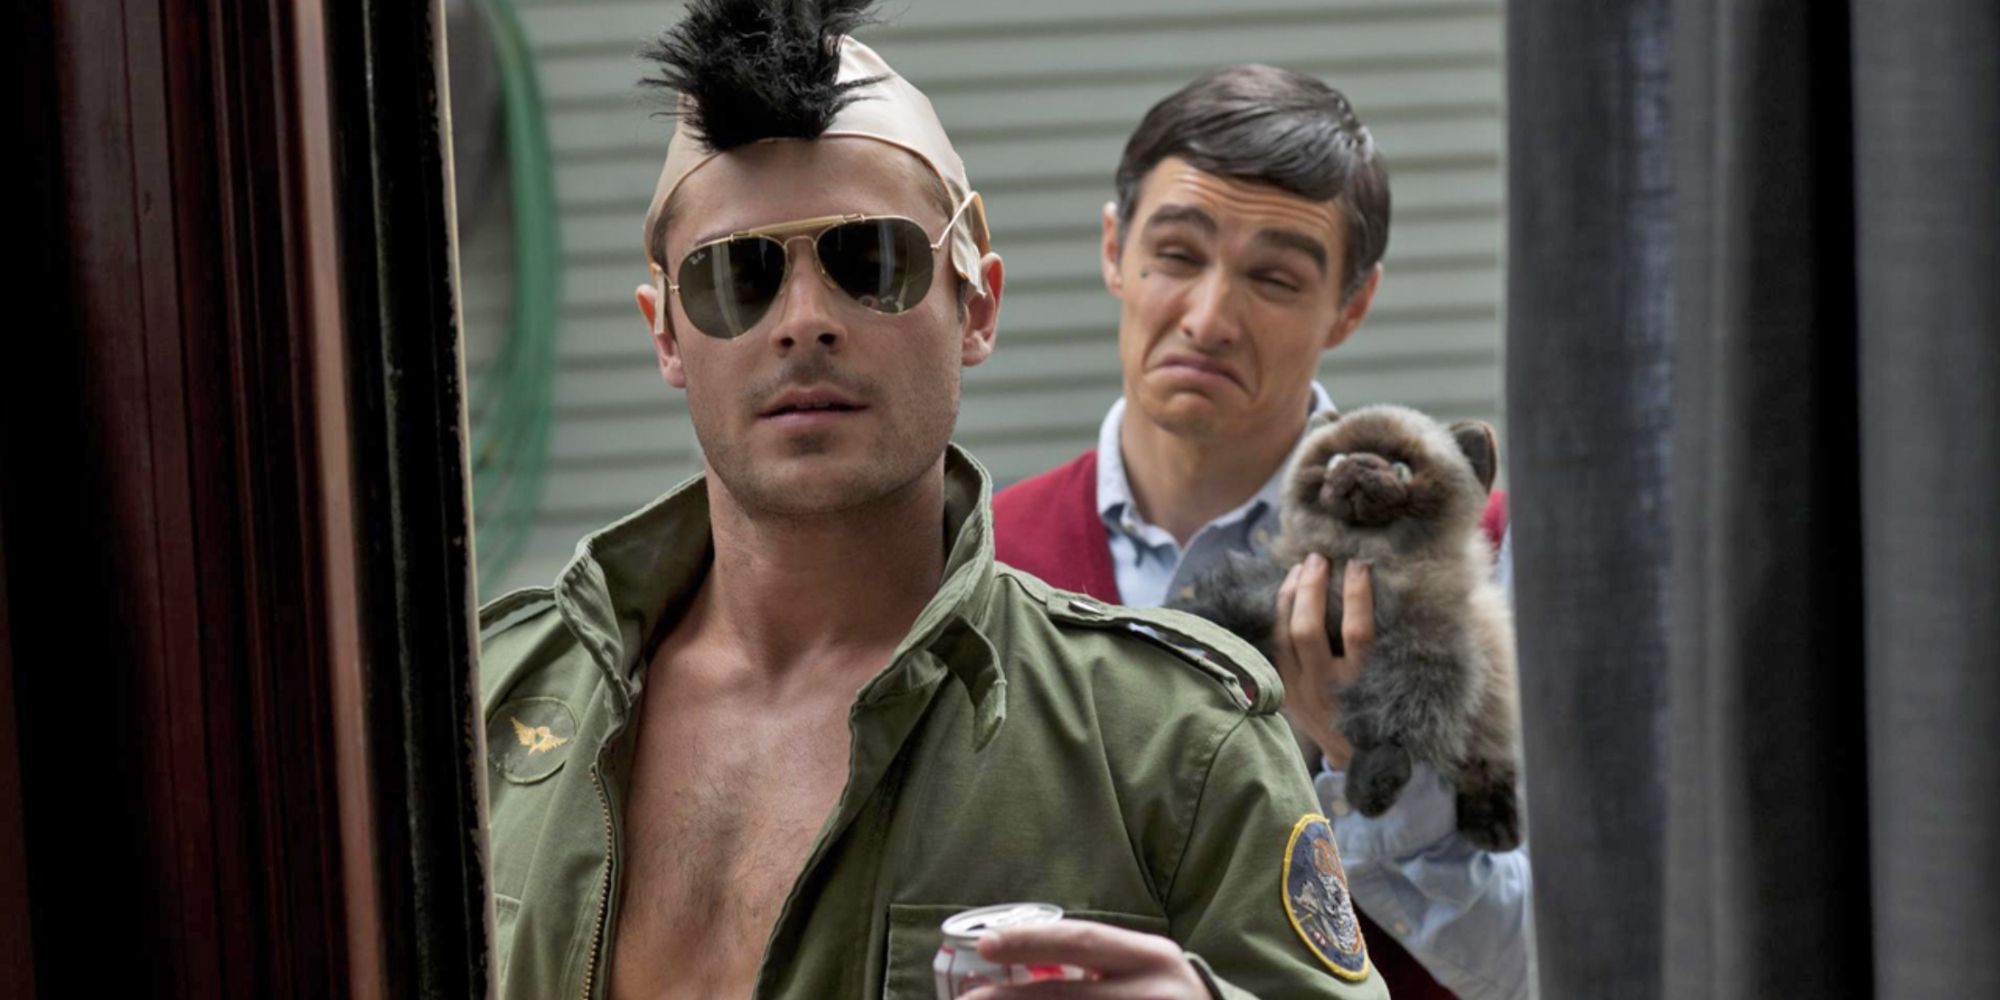 Zac Efron dressed as Travis Bickell and Dave Franco dressed as Jack Byrnes